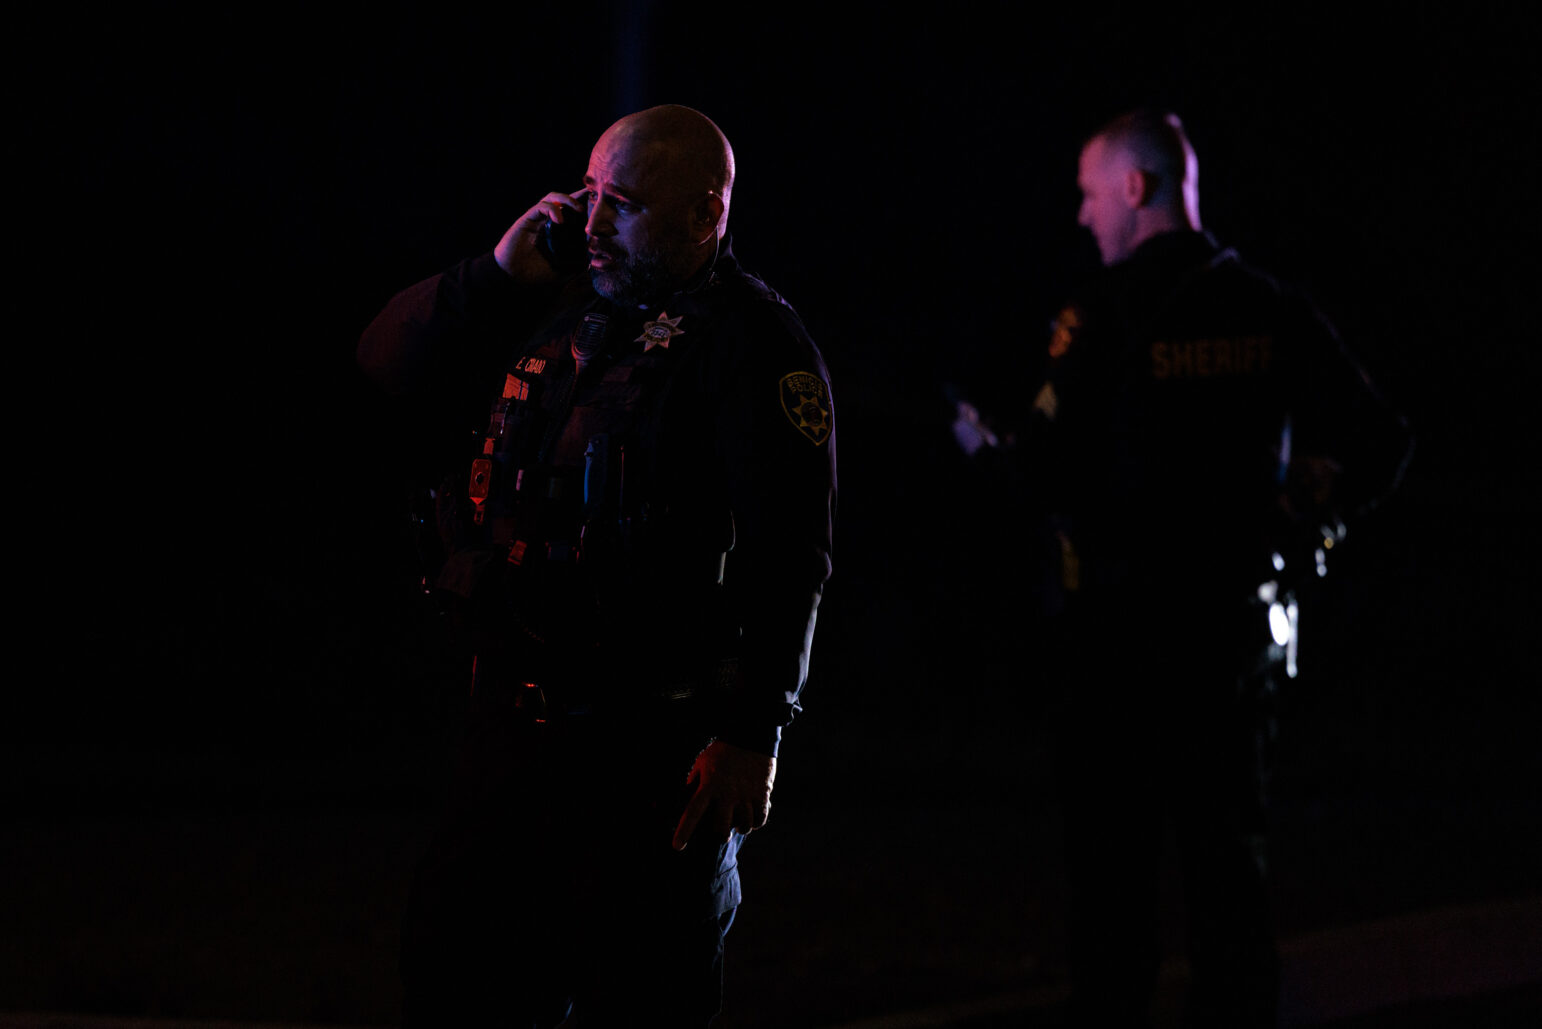 A Benicia police officer speaks on a mobile phone, his face lit by the emergency lights, with another officer in the background. Both are wearing dark uniforms with badges or patches visible.